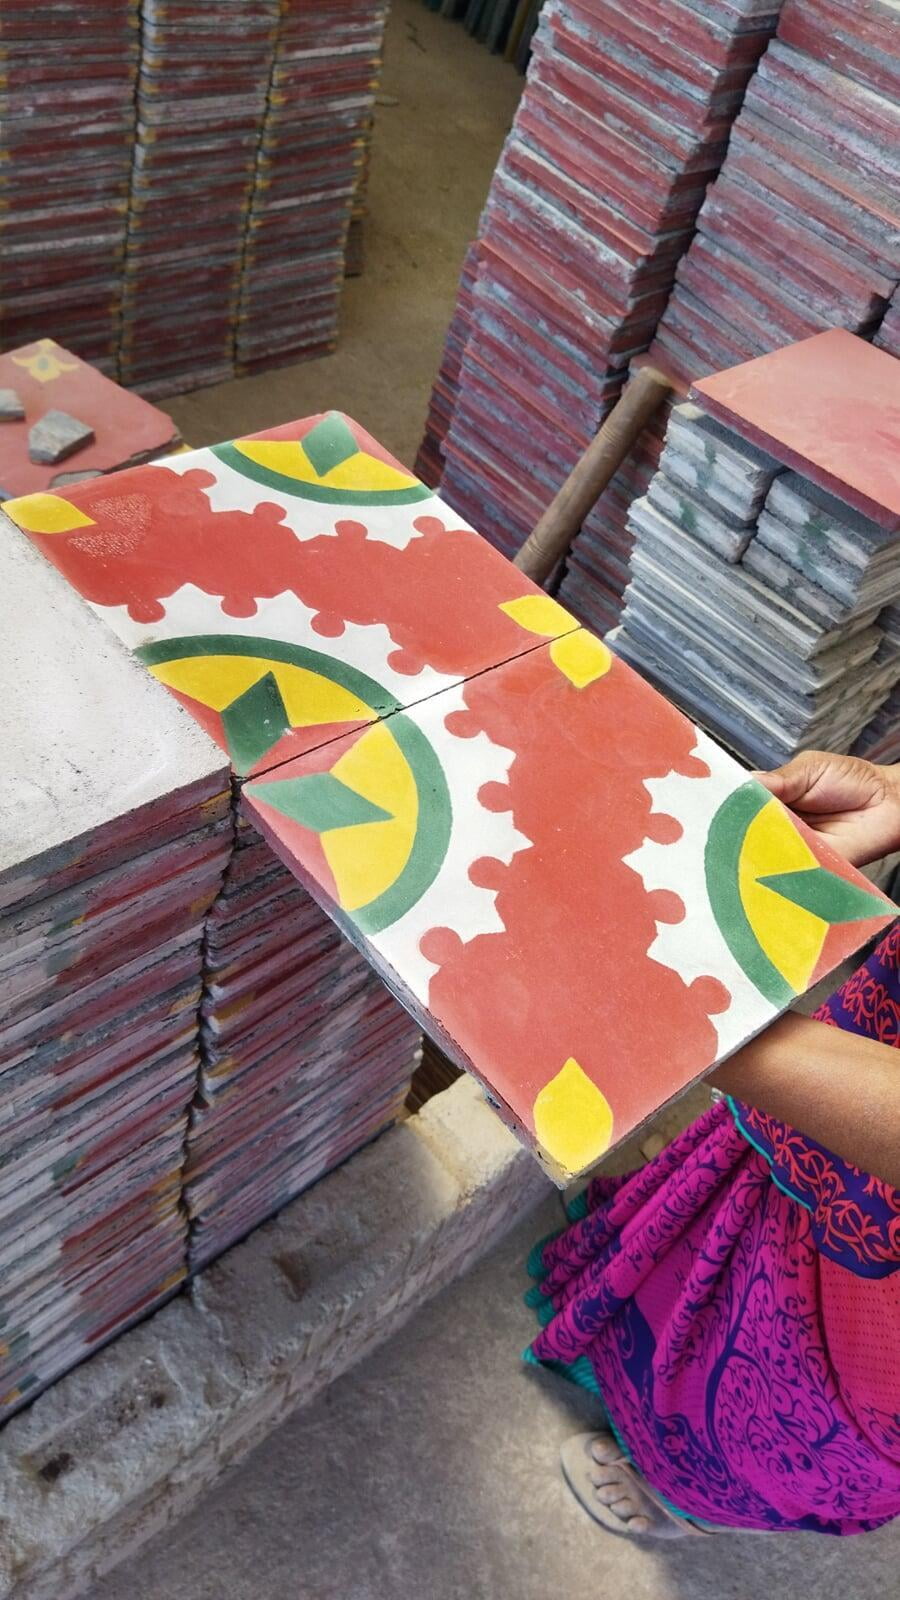 An artisan displays two Athangudi tiles next to each other, so that a partial circular motif is formed by the corners of the two tiles. The tiles are have a red background, and in the corners, a circular pattern surrounding one quarter of an eight pointed star with alternating green and red segments. 